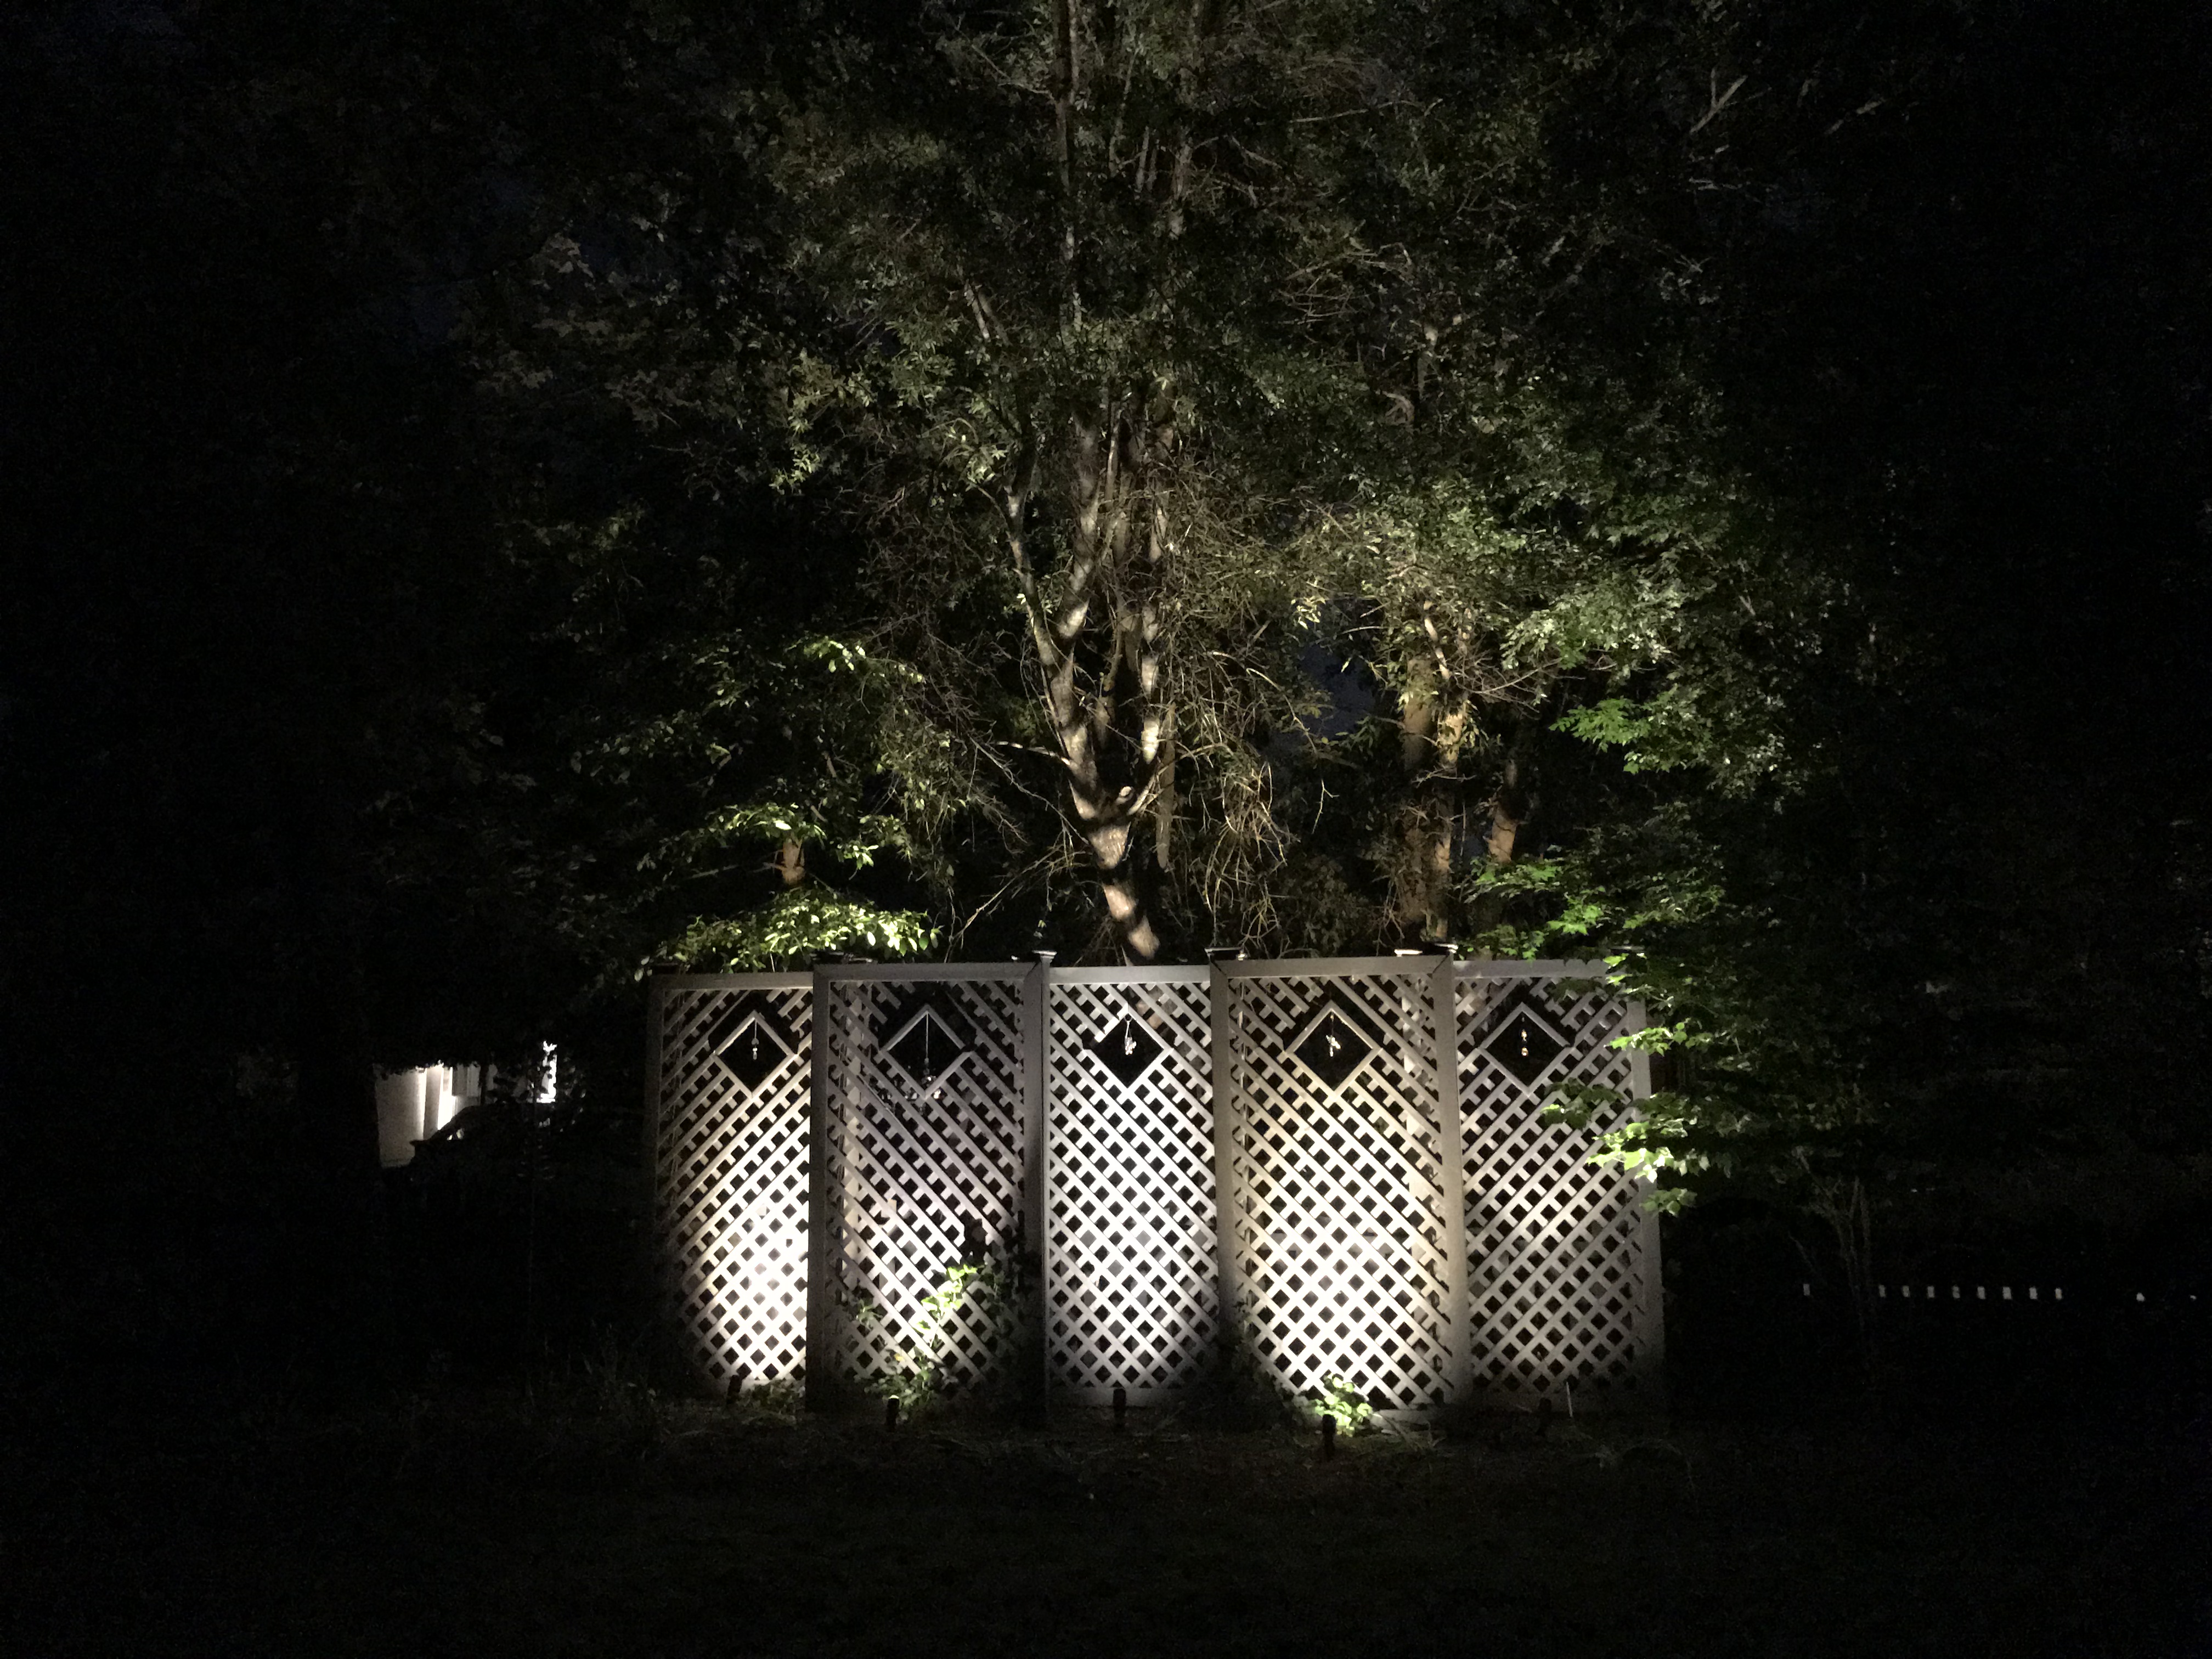 alt="Create an oasis with outdoor landscape lighting"